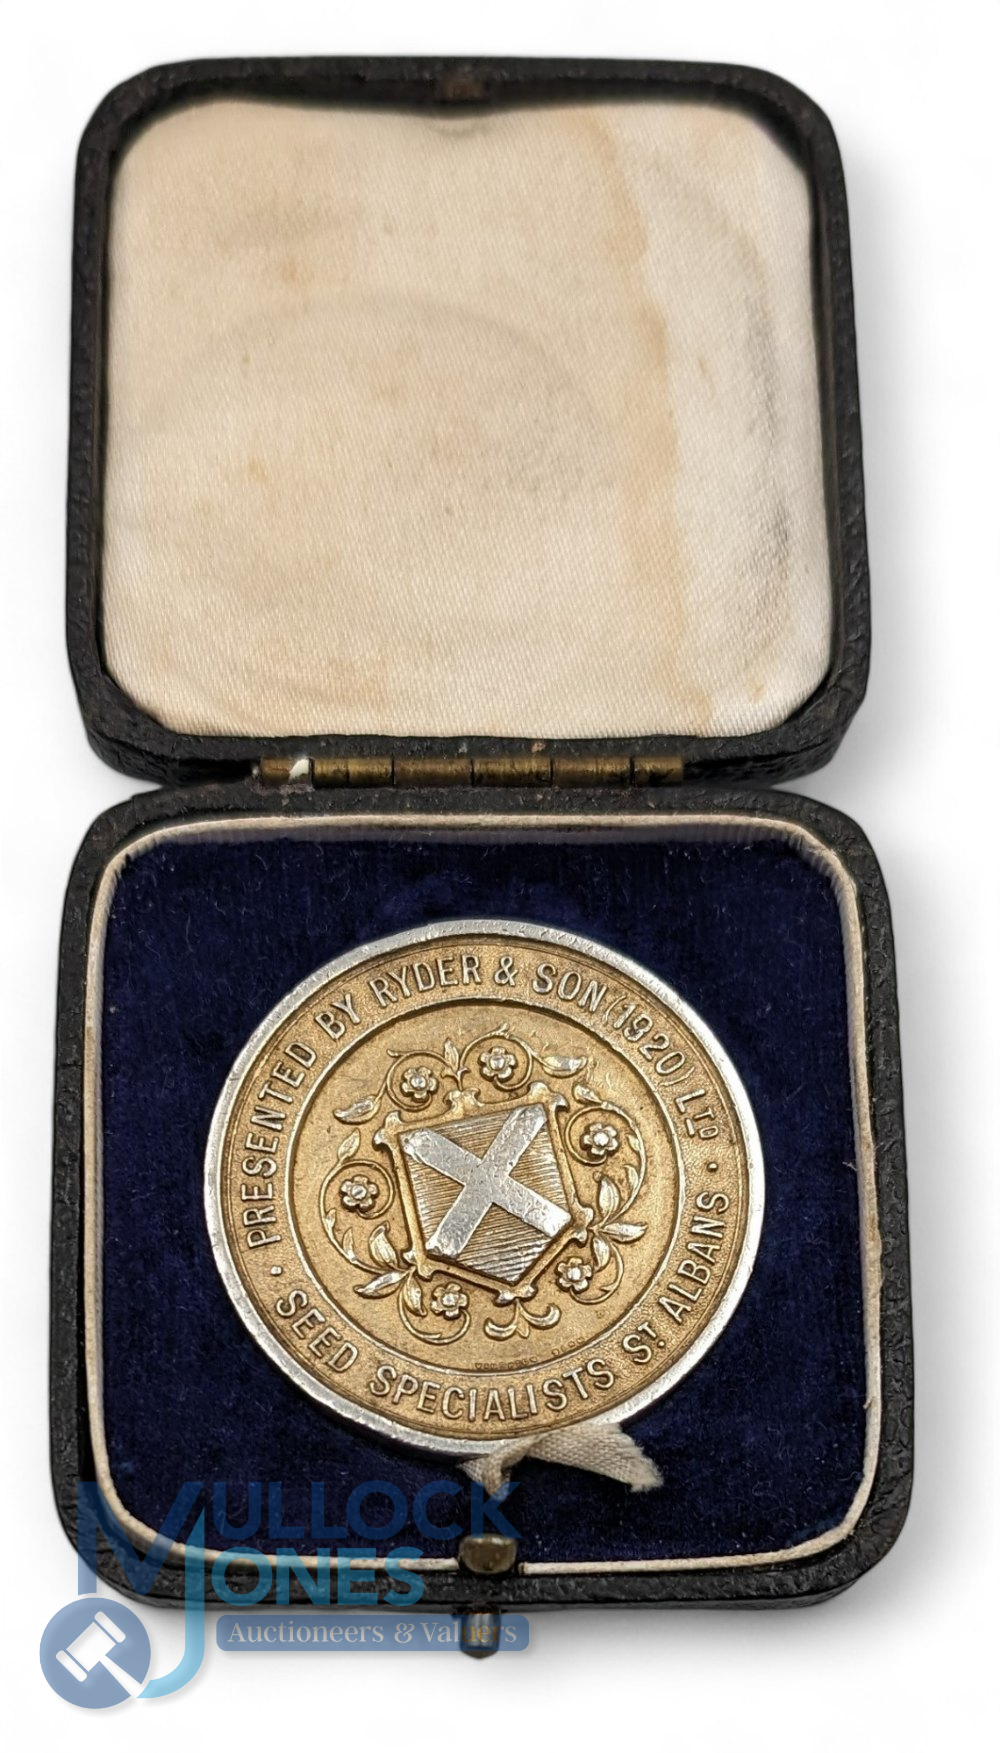 Samuel Ryder & Son Seed Specialists St Albans silver medal - hallmarked Birmingham 1934 in - Image 2 of 3